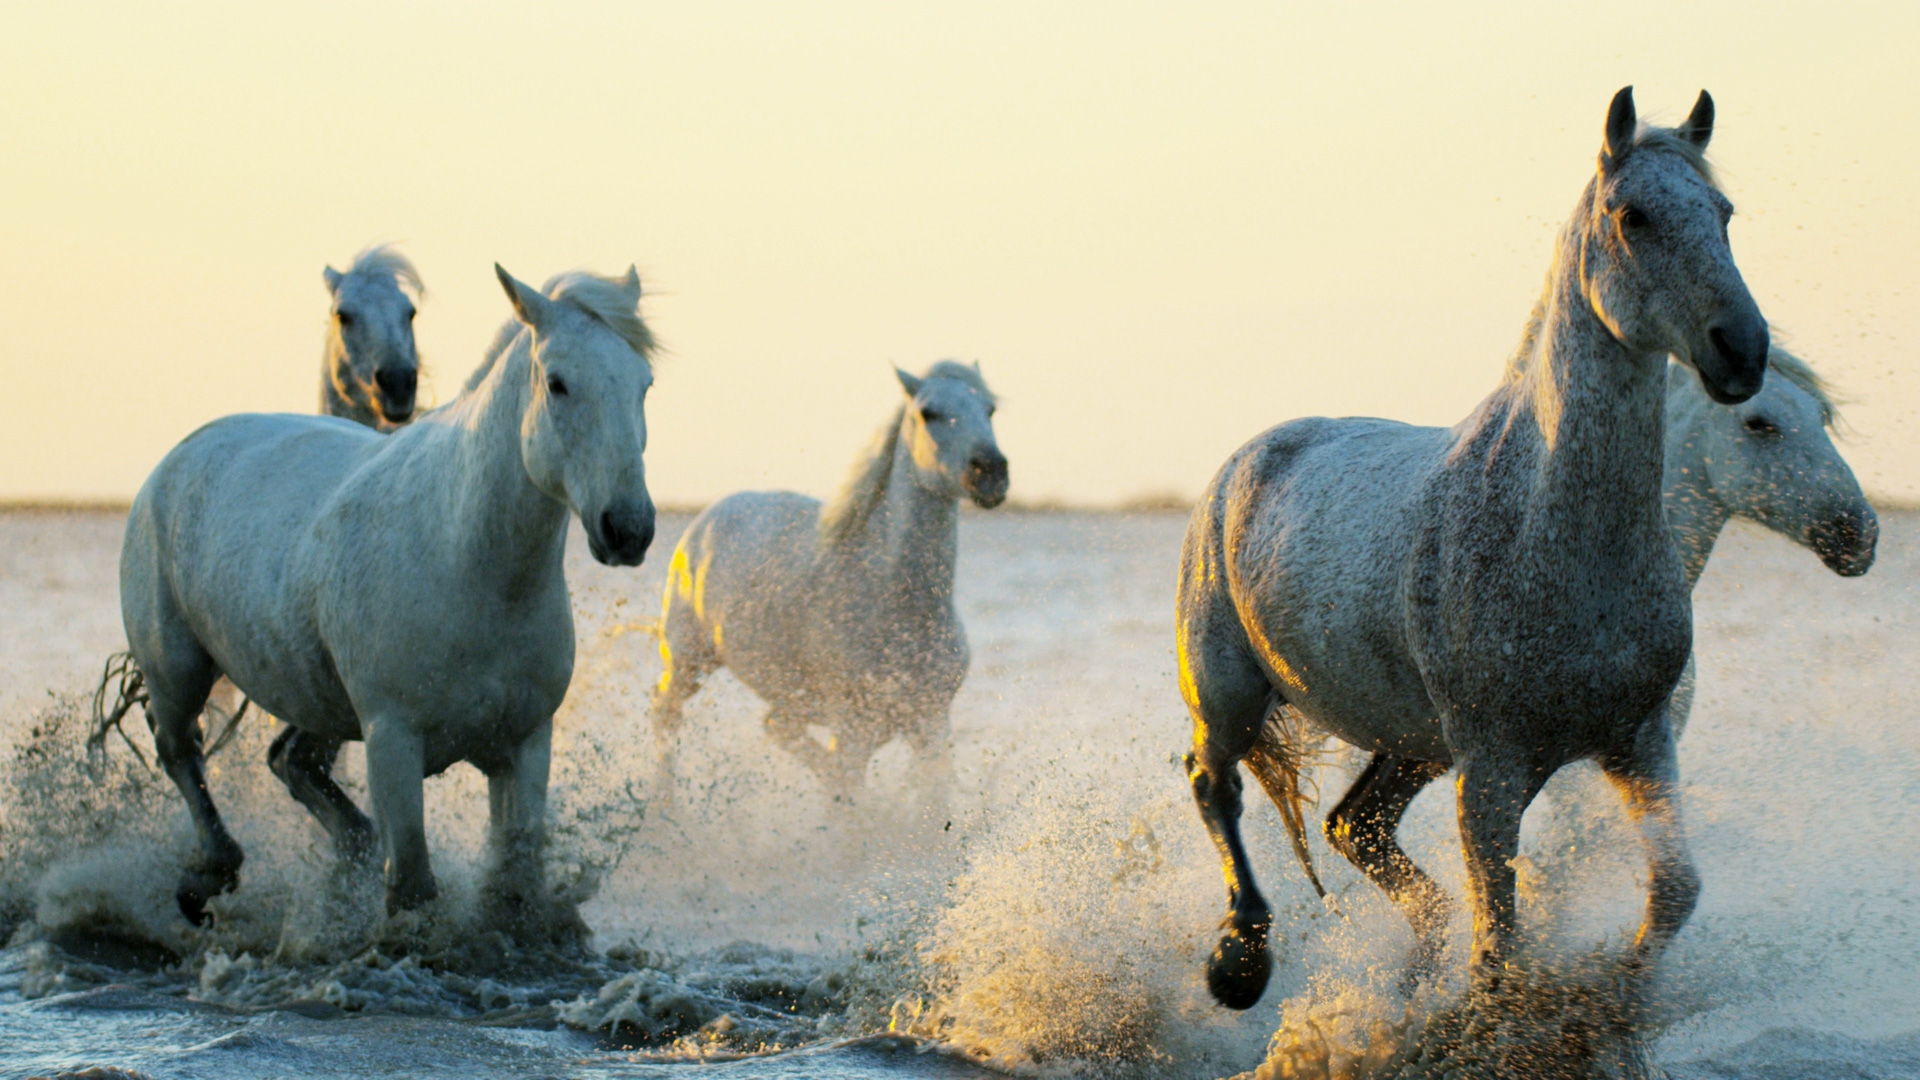 Example of footage with too warm of a white balance with an orange color cast featuring white horses running on a beach at sunrise